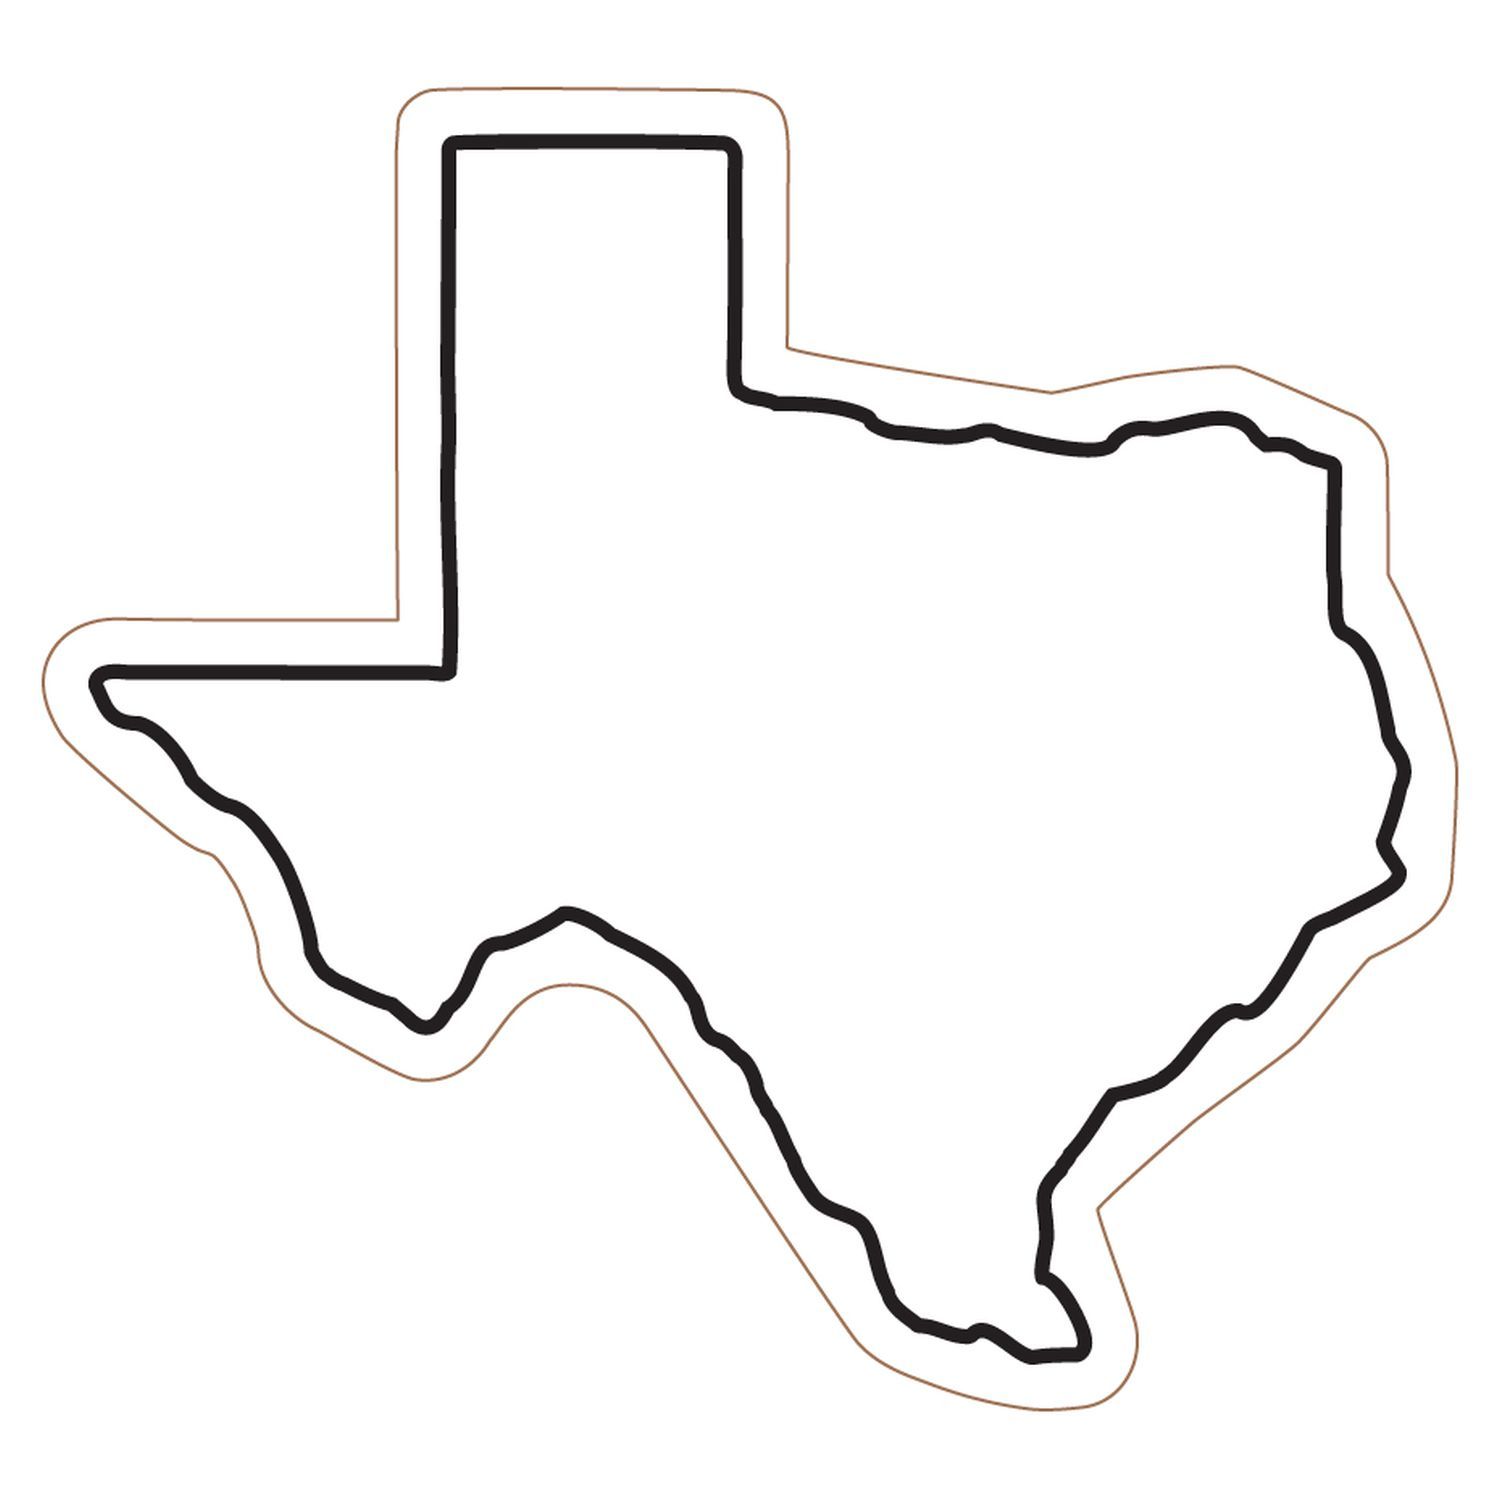 Texas map outline clipart